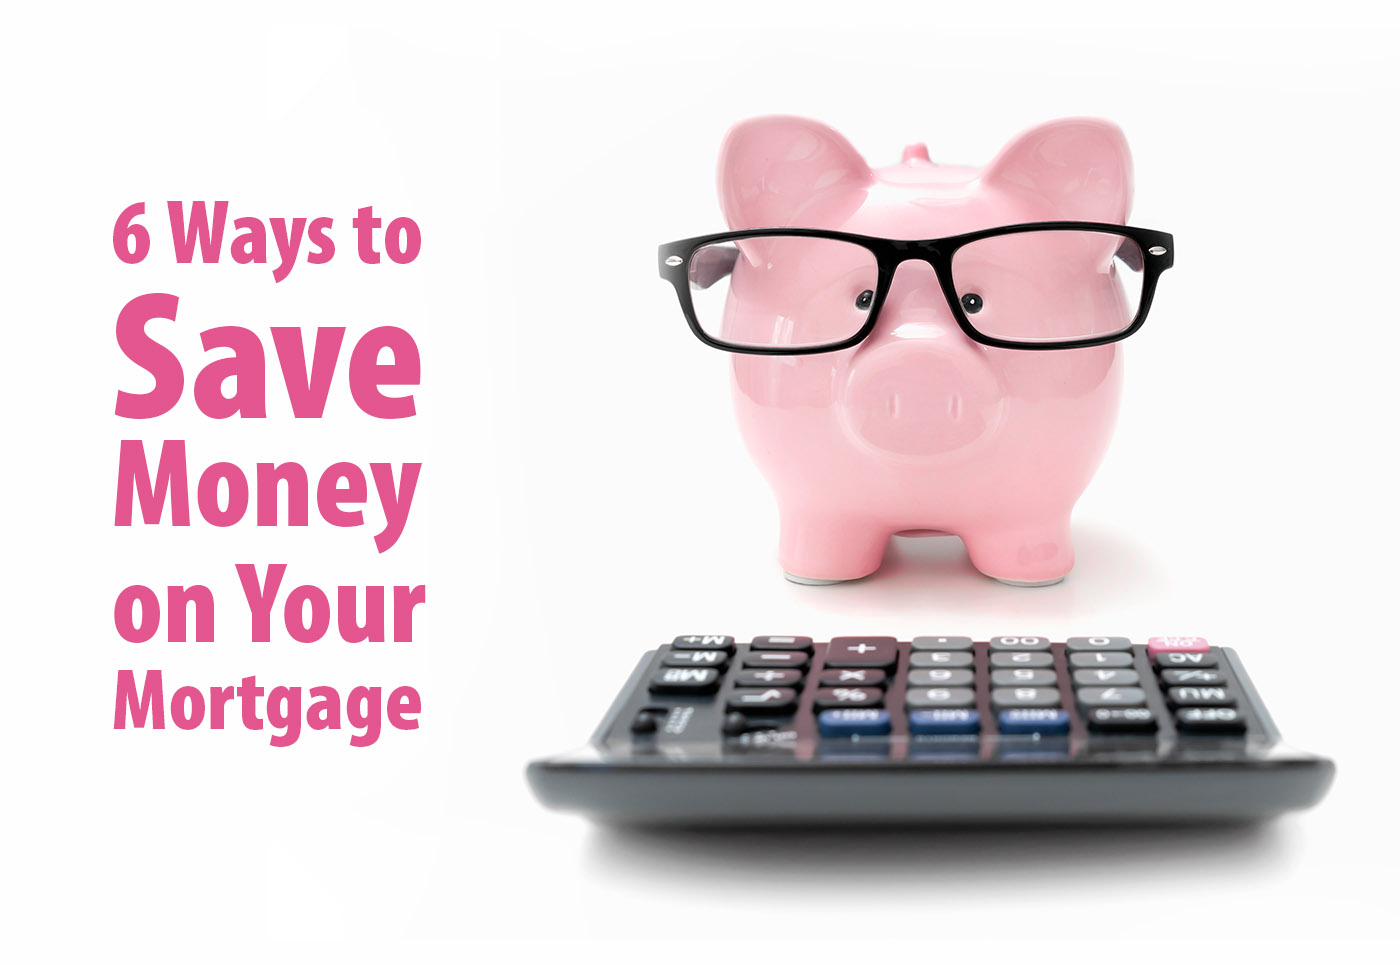 Save money on your mortgage